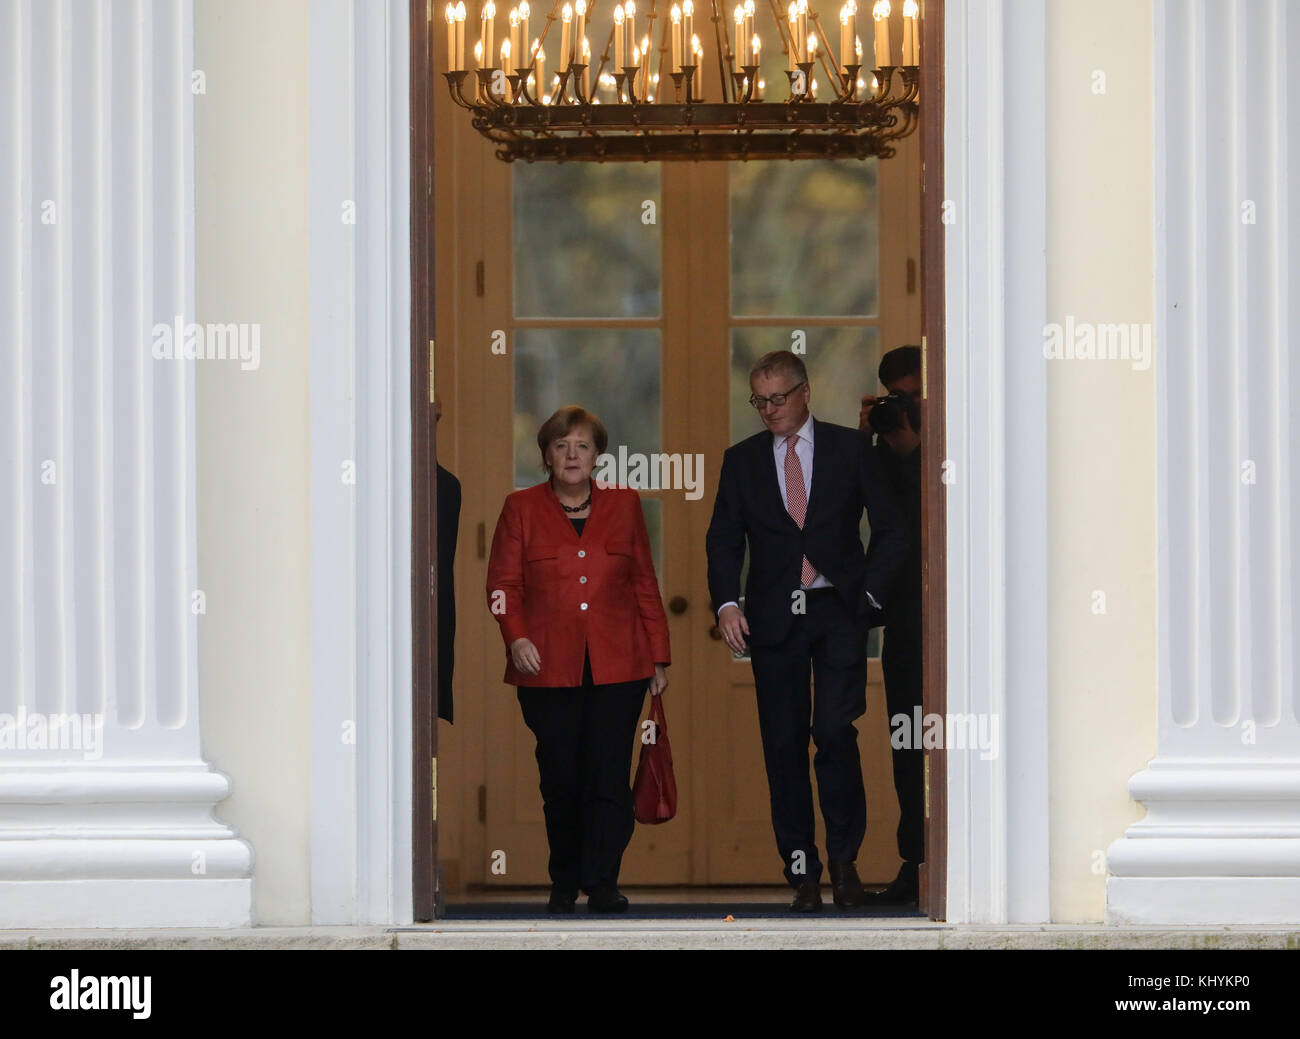 German Chacellor Angela Merkel (CDU), accompanied by Stephan Steinlein, head of the Office of the Federal President, leaves the Bellevue Palace after a conversation with President Steinmeier in Berlin, 20 November 2017. The conversation centred on the course of action after the failure of the exploratory talks regarding a so-called Jamaica coalition with the Christian Democrats (CDU), Christian Social Union (CSU), Free Democrats (FDP) and the Green Party. The FDP cancelled the 'Jamaica' exploratory talks pursuing negotiations to form a cabinet.a so-called Jamaica coalition with the Christian D Stock Photo